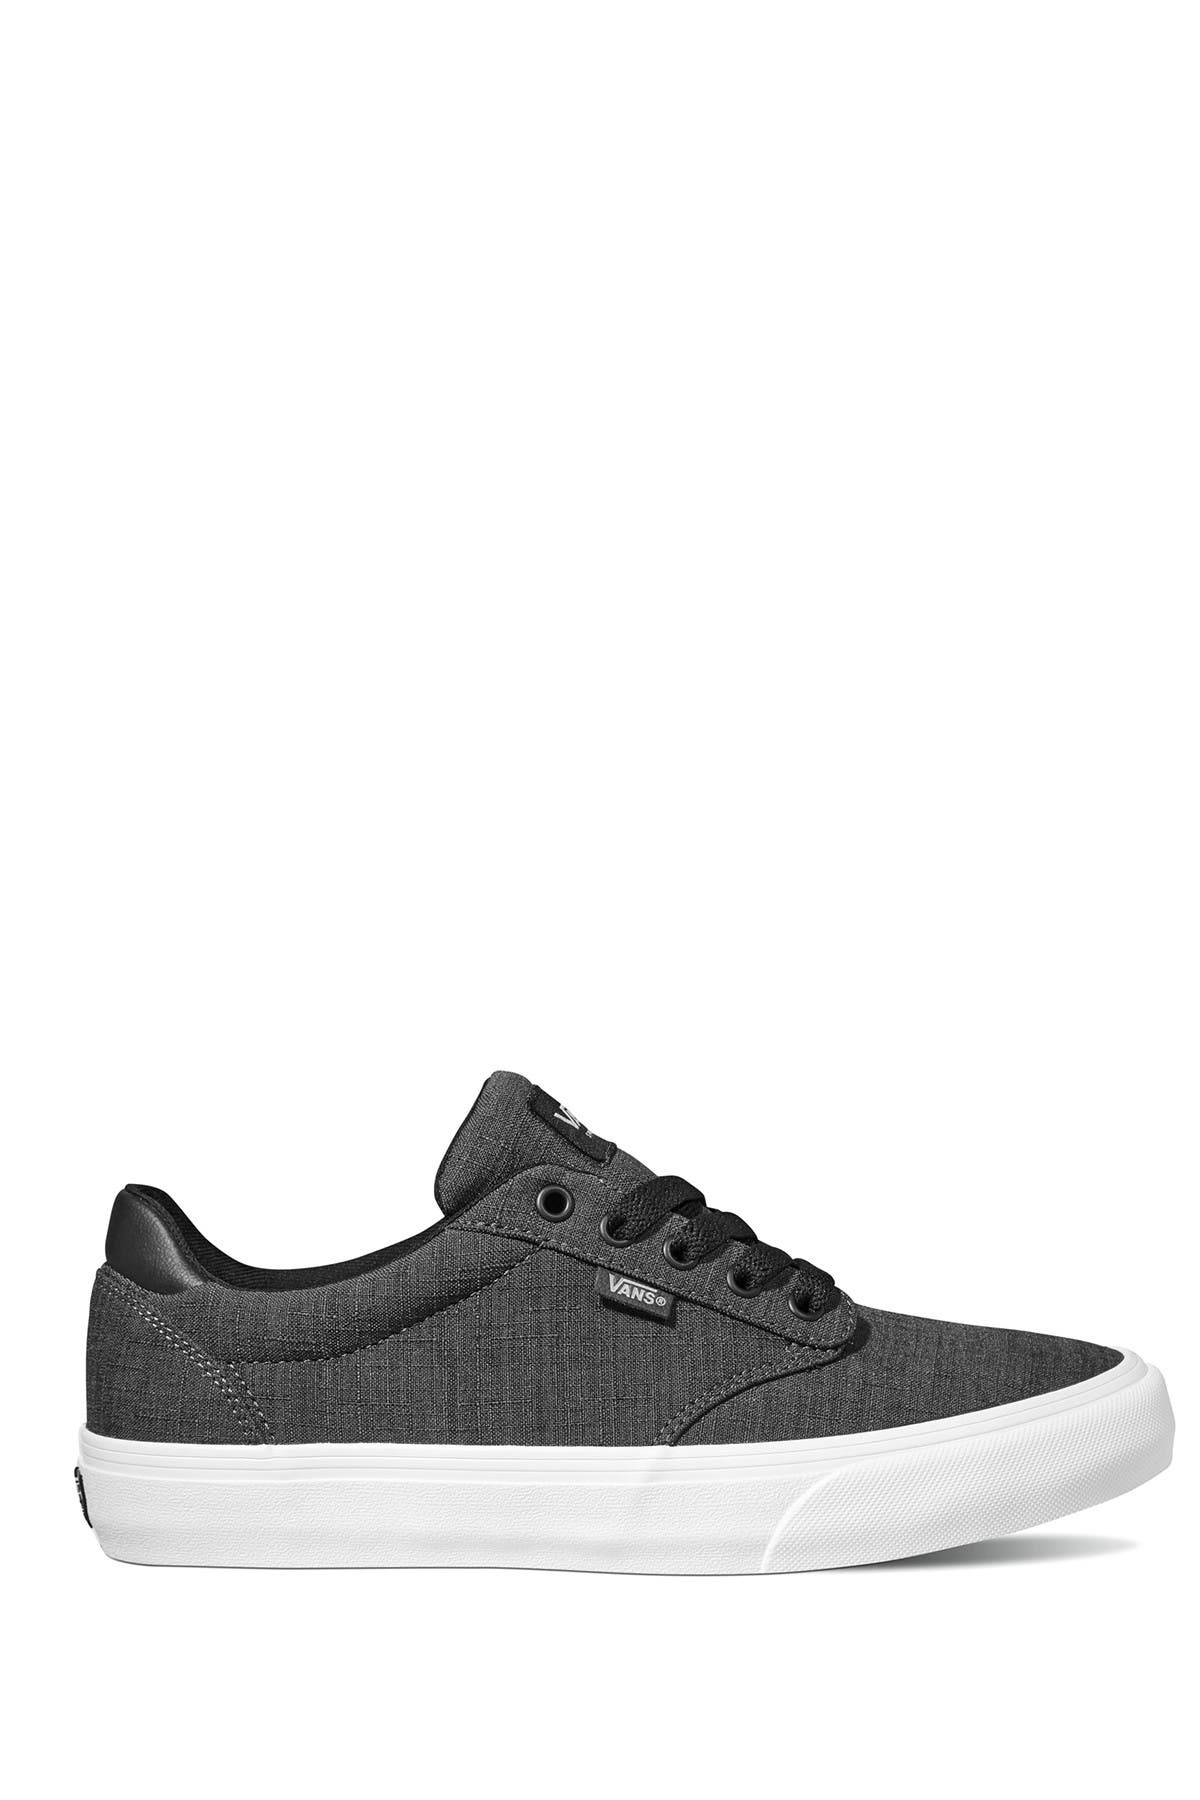 atwood deluxe sneaker